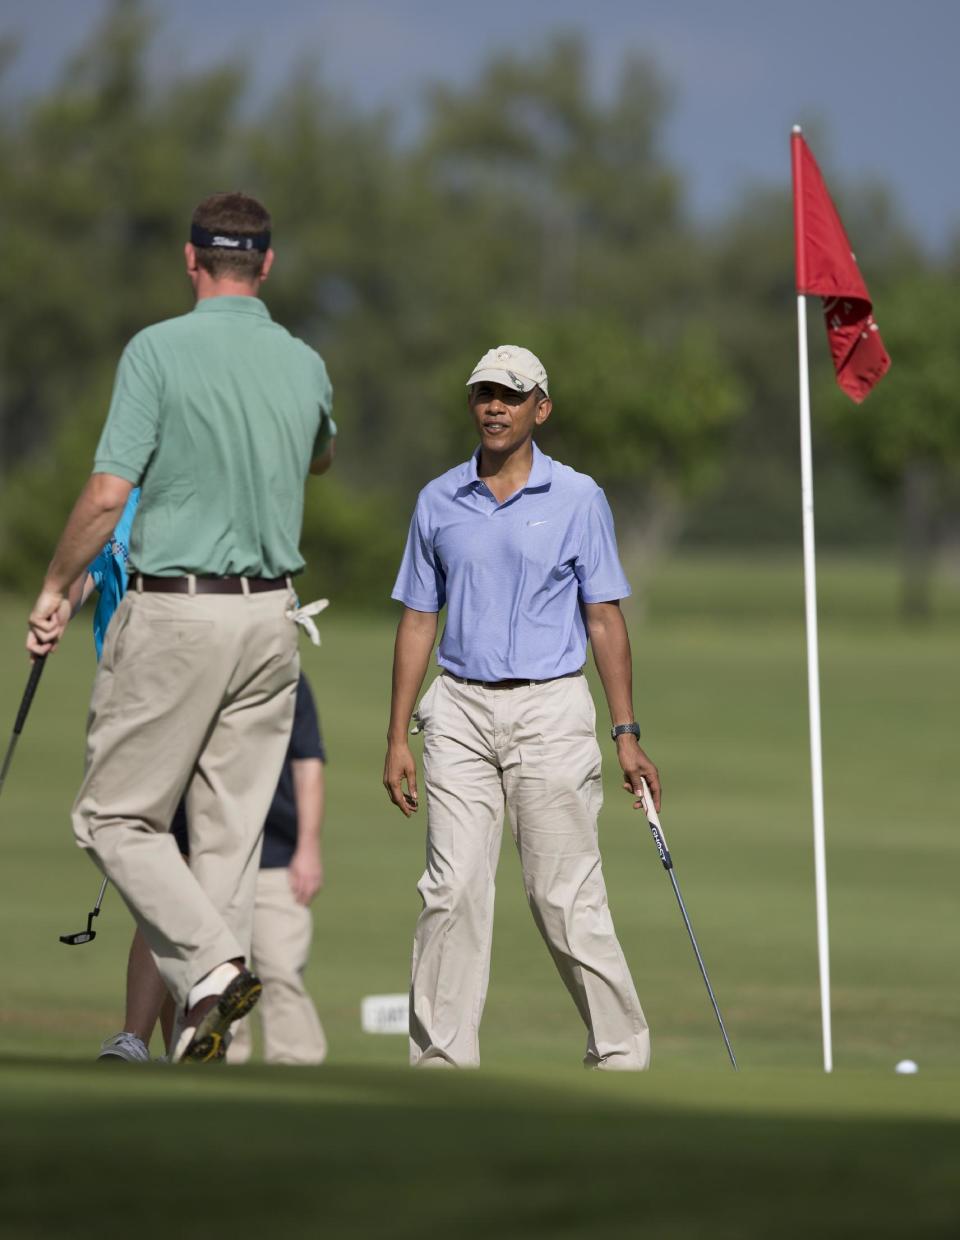 President Barack Obama walks onto the second green to join Marvin Nicholson, left, at Kaneohe Klipper Golf Course on Marine Corps Base Hawaii in Kaneohe Bay, Hawaii, Thursday, Jan. 2, 2014. The first family is in Hawaii for their annual holiday vacation. (AP Photo/Carolyn Kaster)